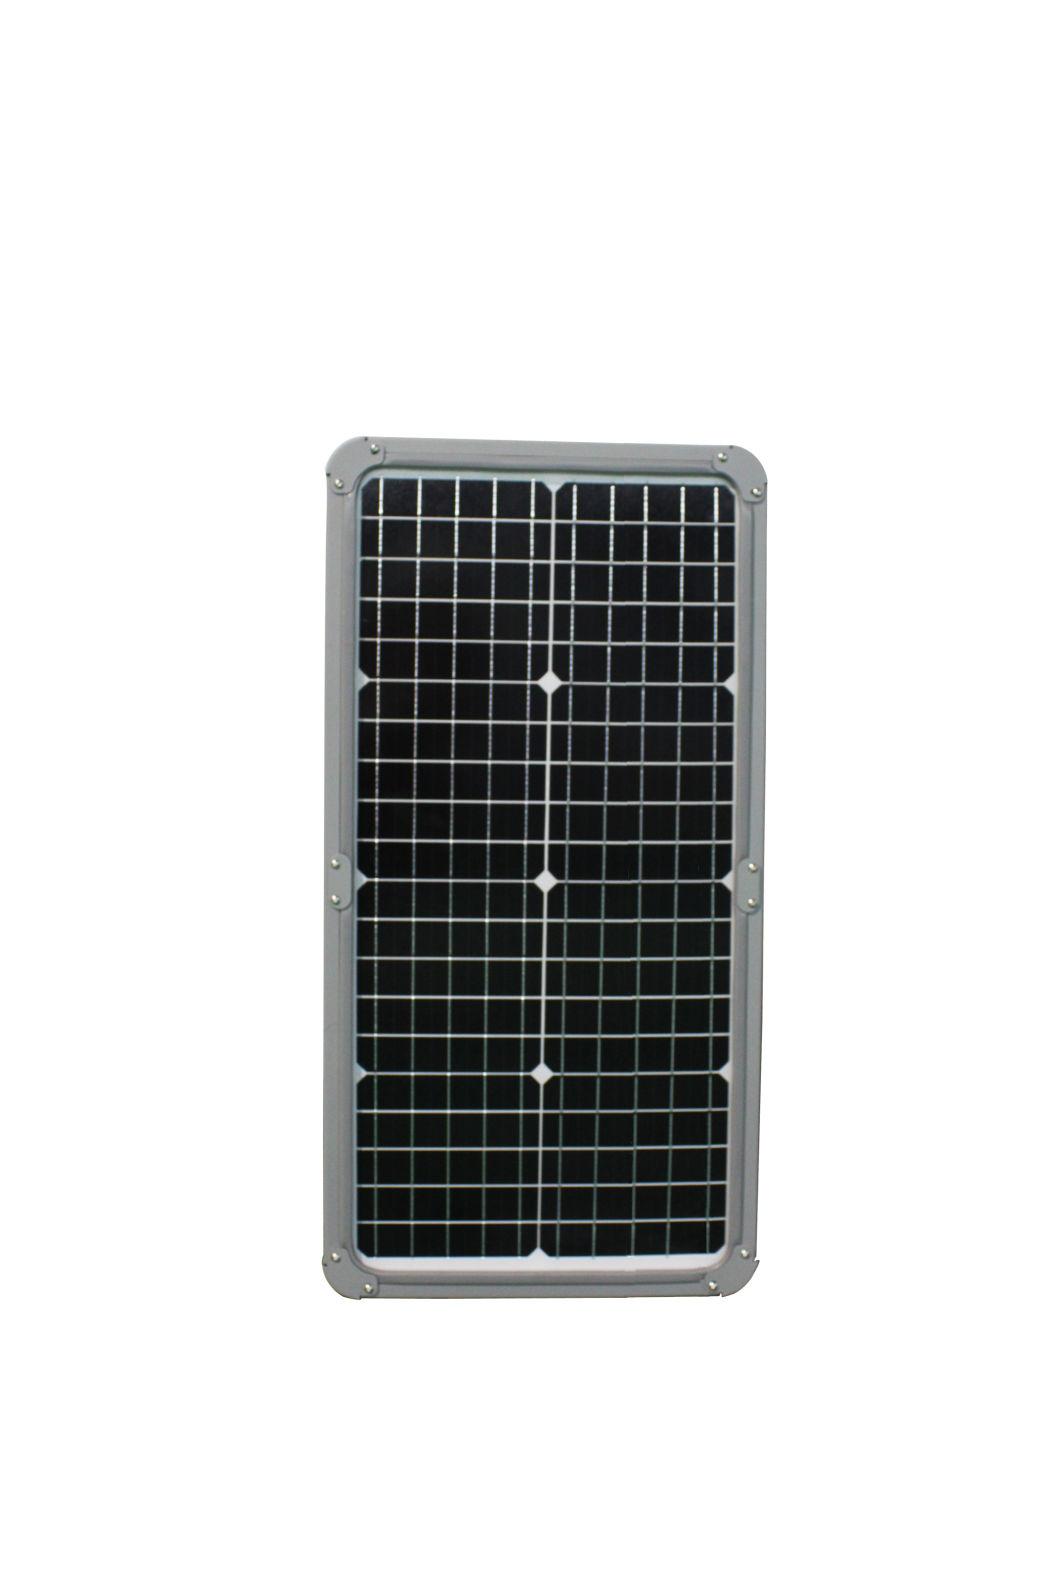 100W Good Price China Manufacture Panel Lights Outside High Power Cell Road Lamp LED Solar Street Light